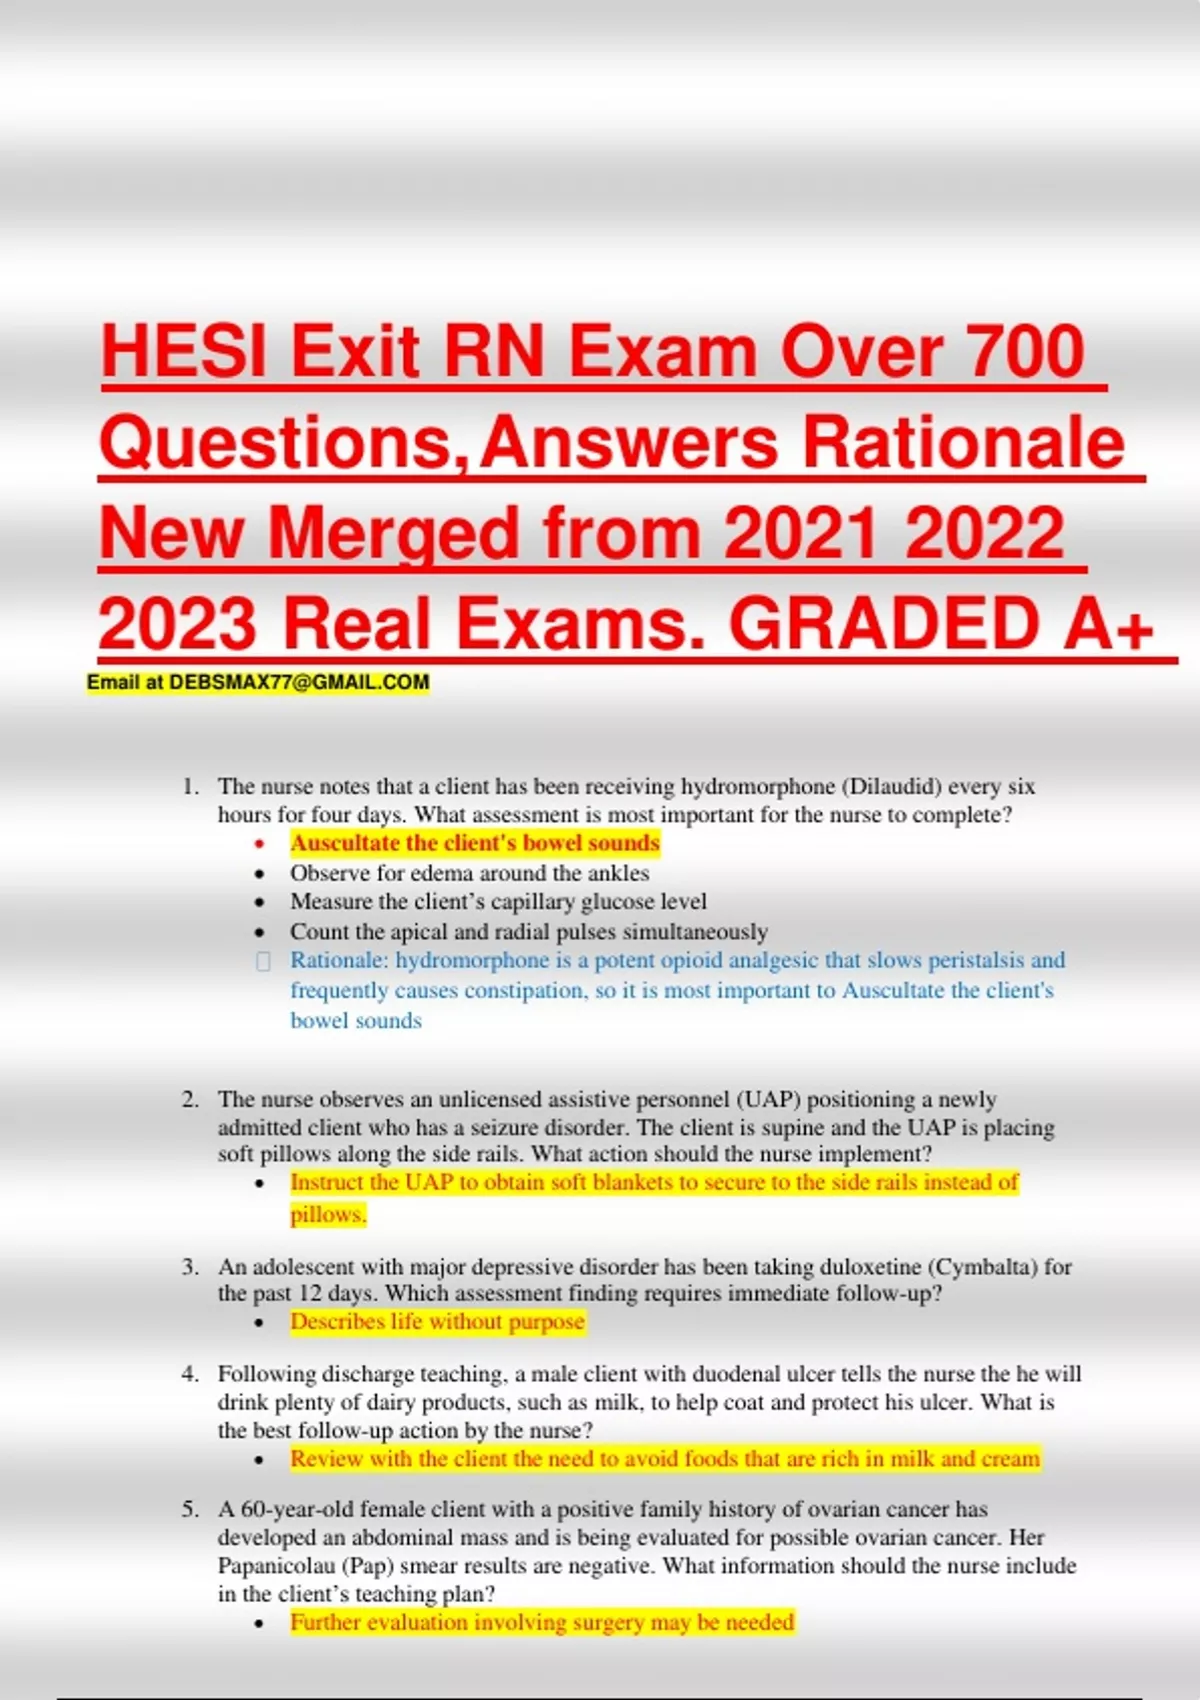 Macroeconomics: Chapter 1 Question & Answers Best Rated A+., Exams Nursing